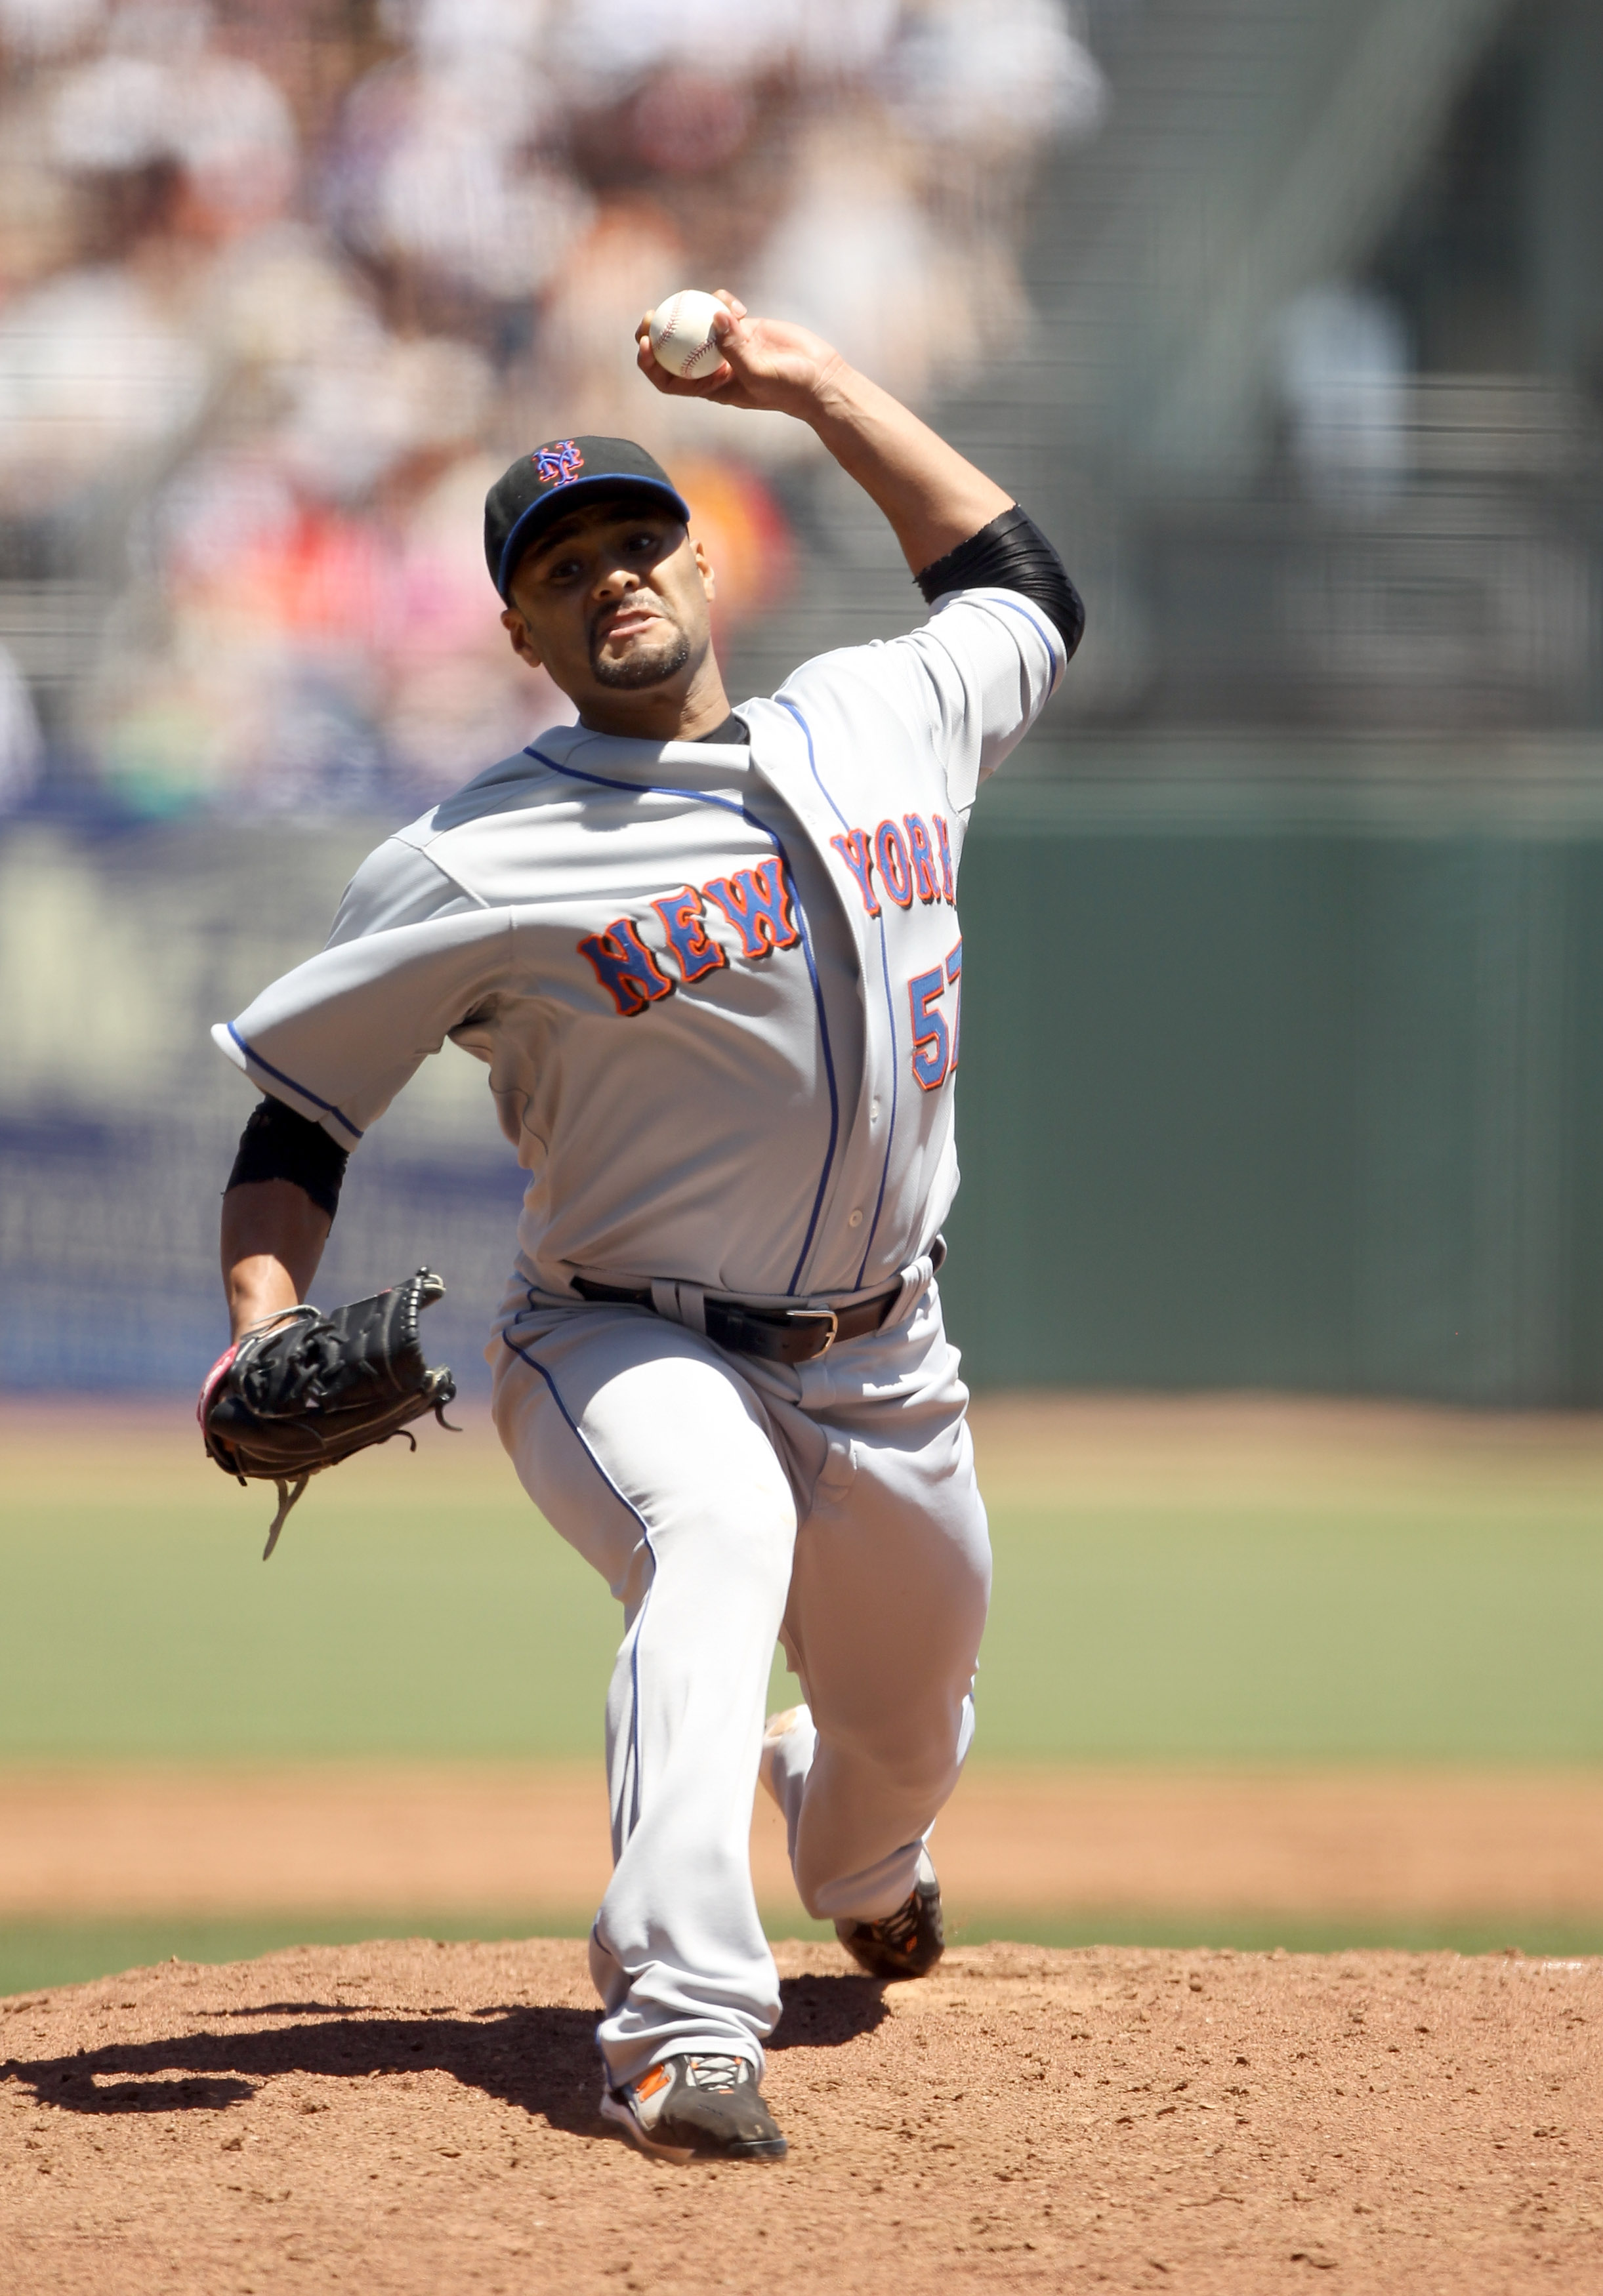 SAN FRANCISCO - JULY 18:  Johan Santana #57 of the New York Mets pitches against the San Francisco Giants at AT&T Park on July 18, 2010 in San Francisco, California.  (Photo by Ezra Shaw/Getty Images)